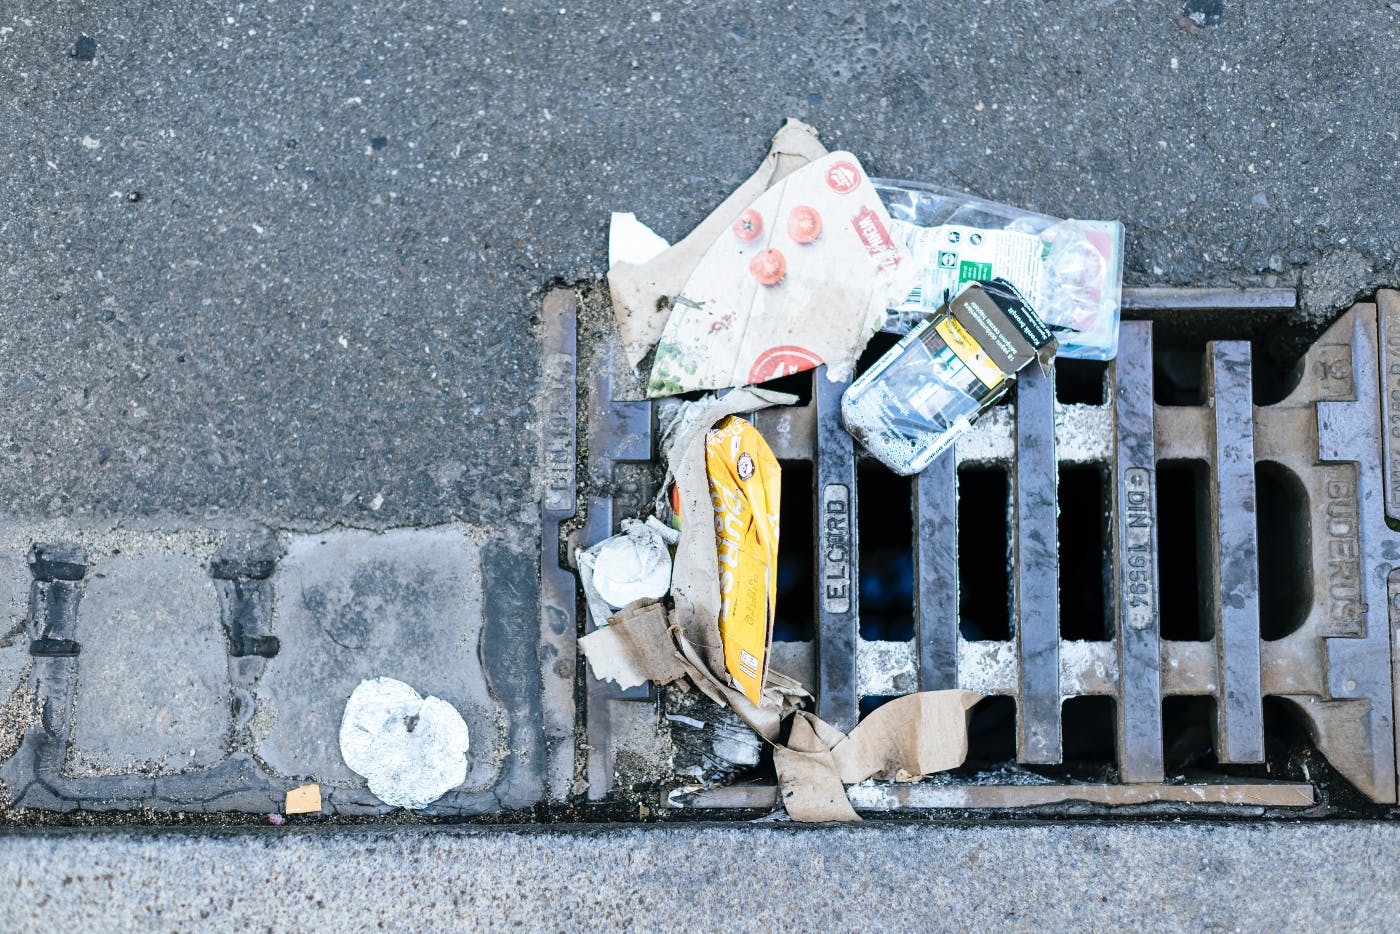 Gutter trash stopped by a storm drain